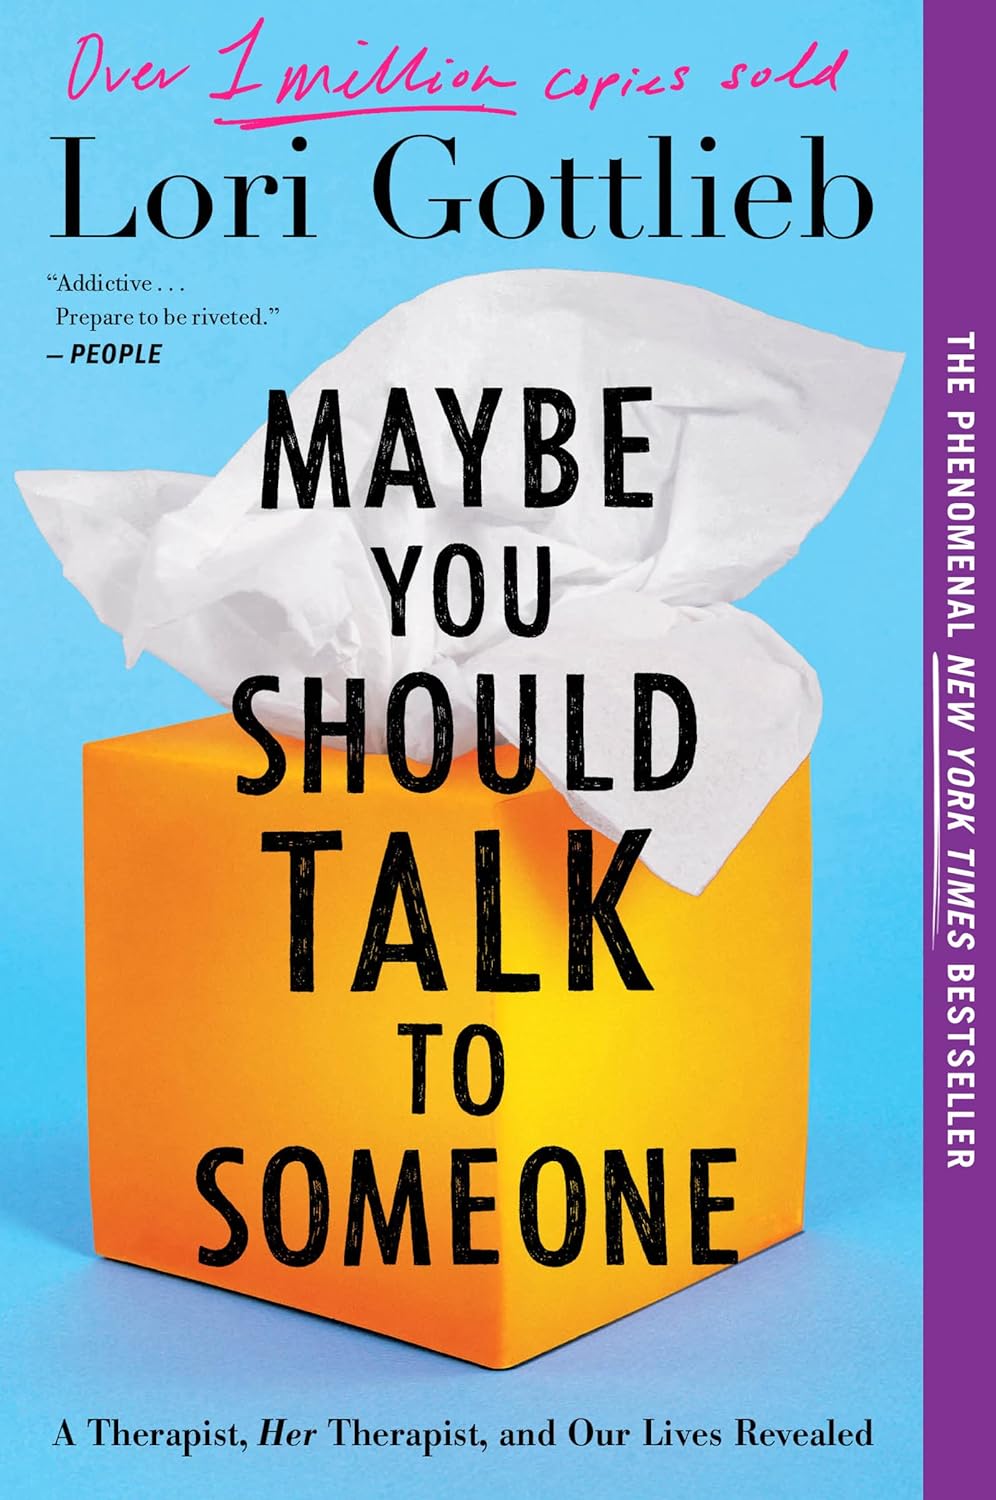 'Maybe You Should Talk To Someone' by Lori Gottlieb